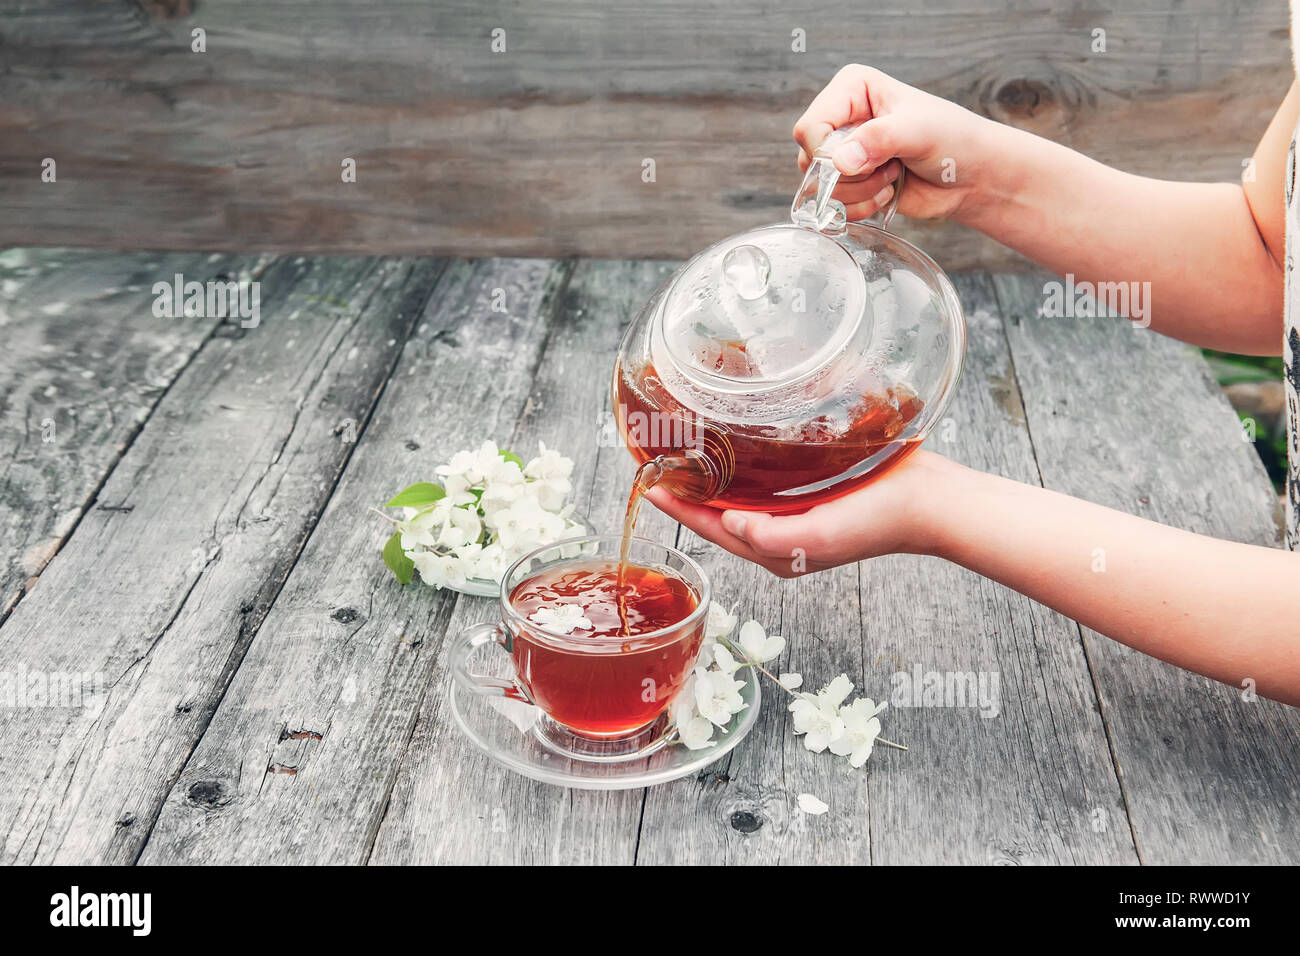 The girl pours hot herbal jasmine tea in a transparent glass cup on a wooden table. Stock Photo